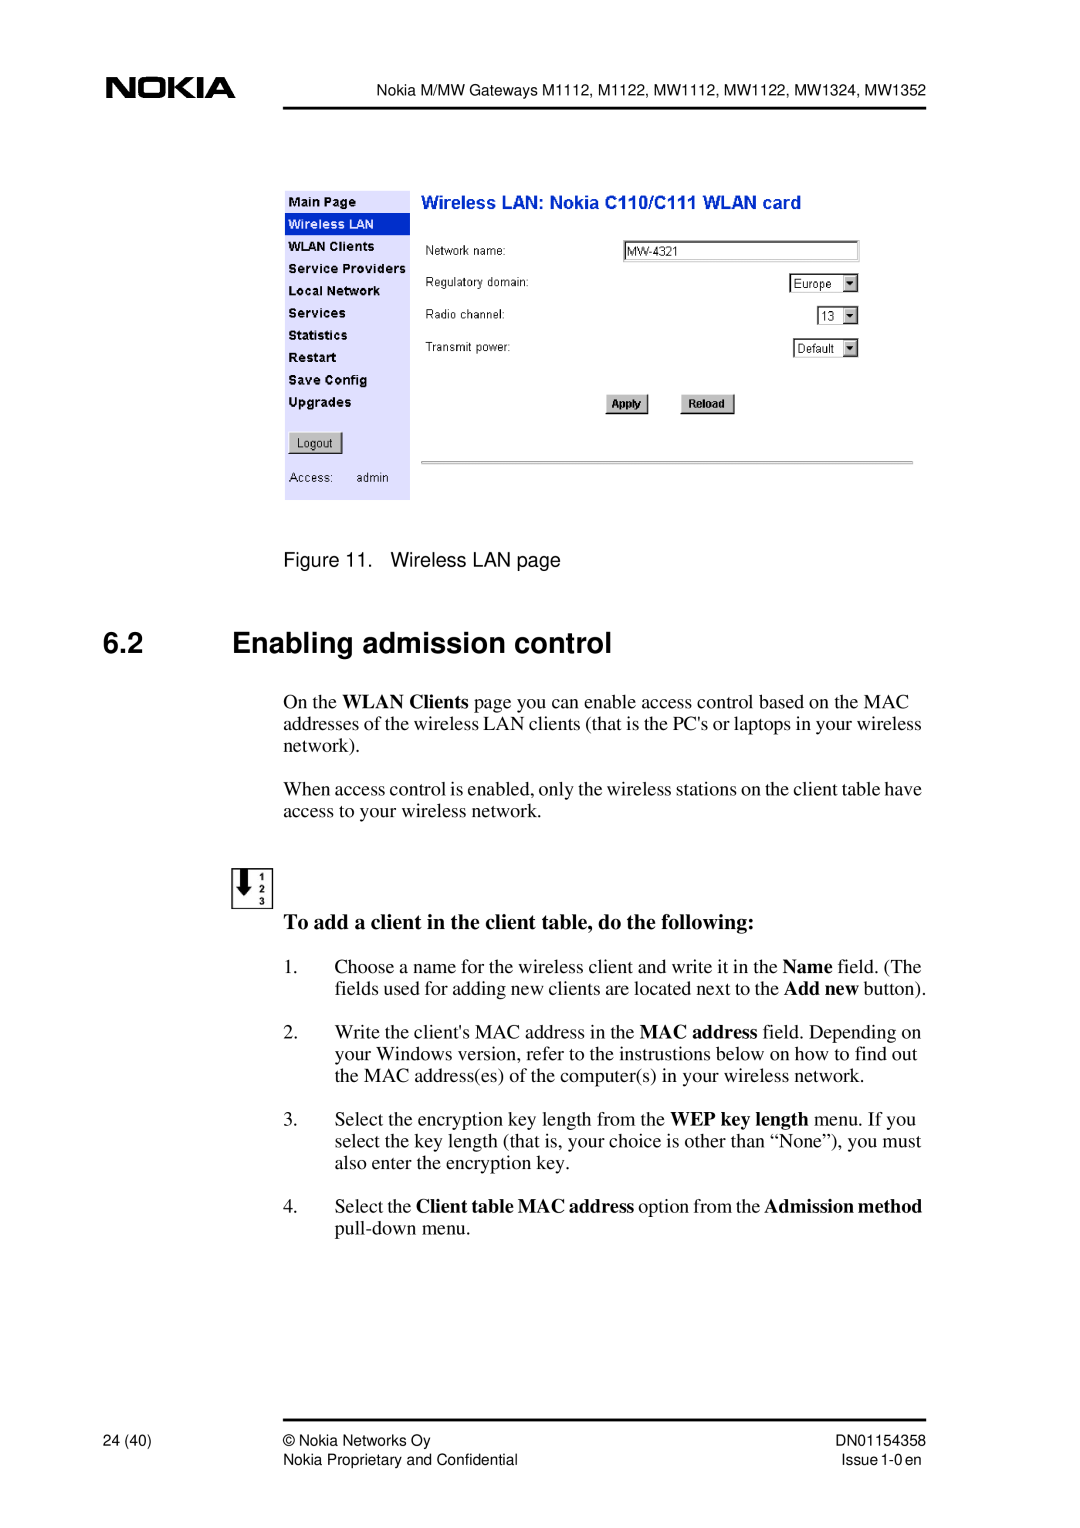 Nokia DSL Gateway High-Speed Internet Connection manual Enabling admission control 